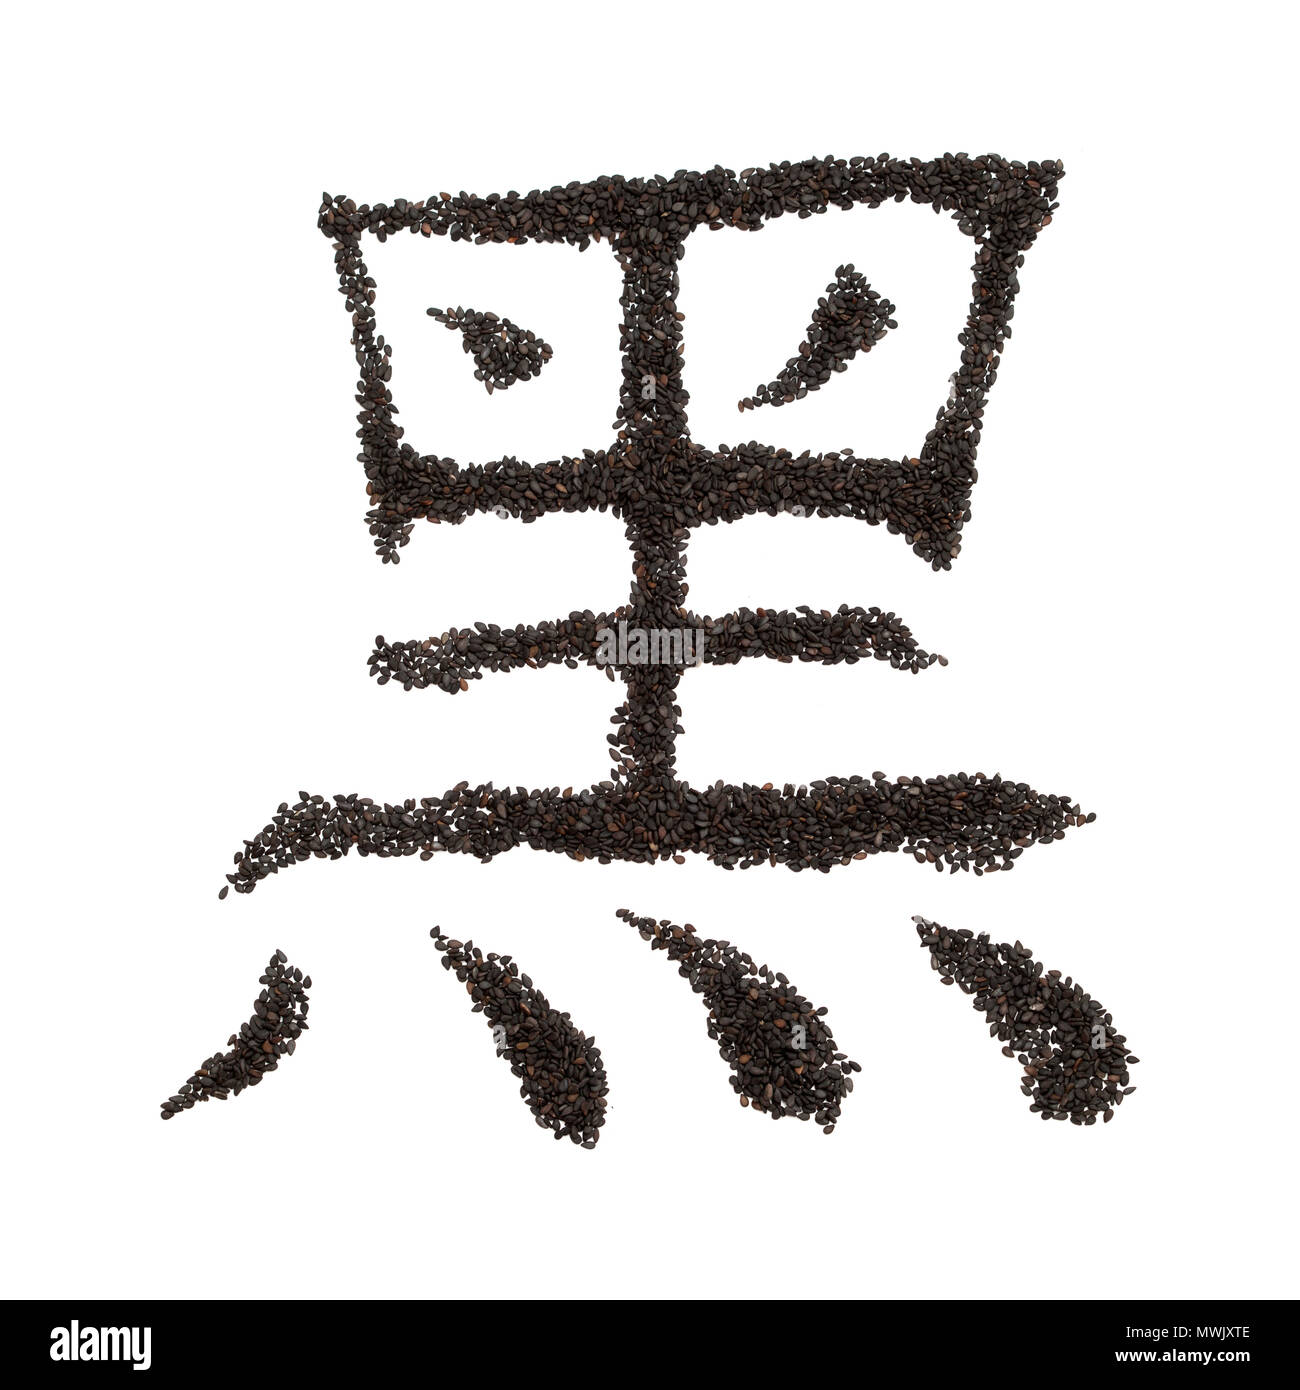 Chinese character hei - black, made of black sesame seeds on white background Stock Photo